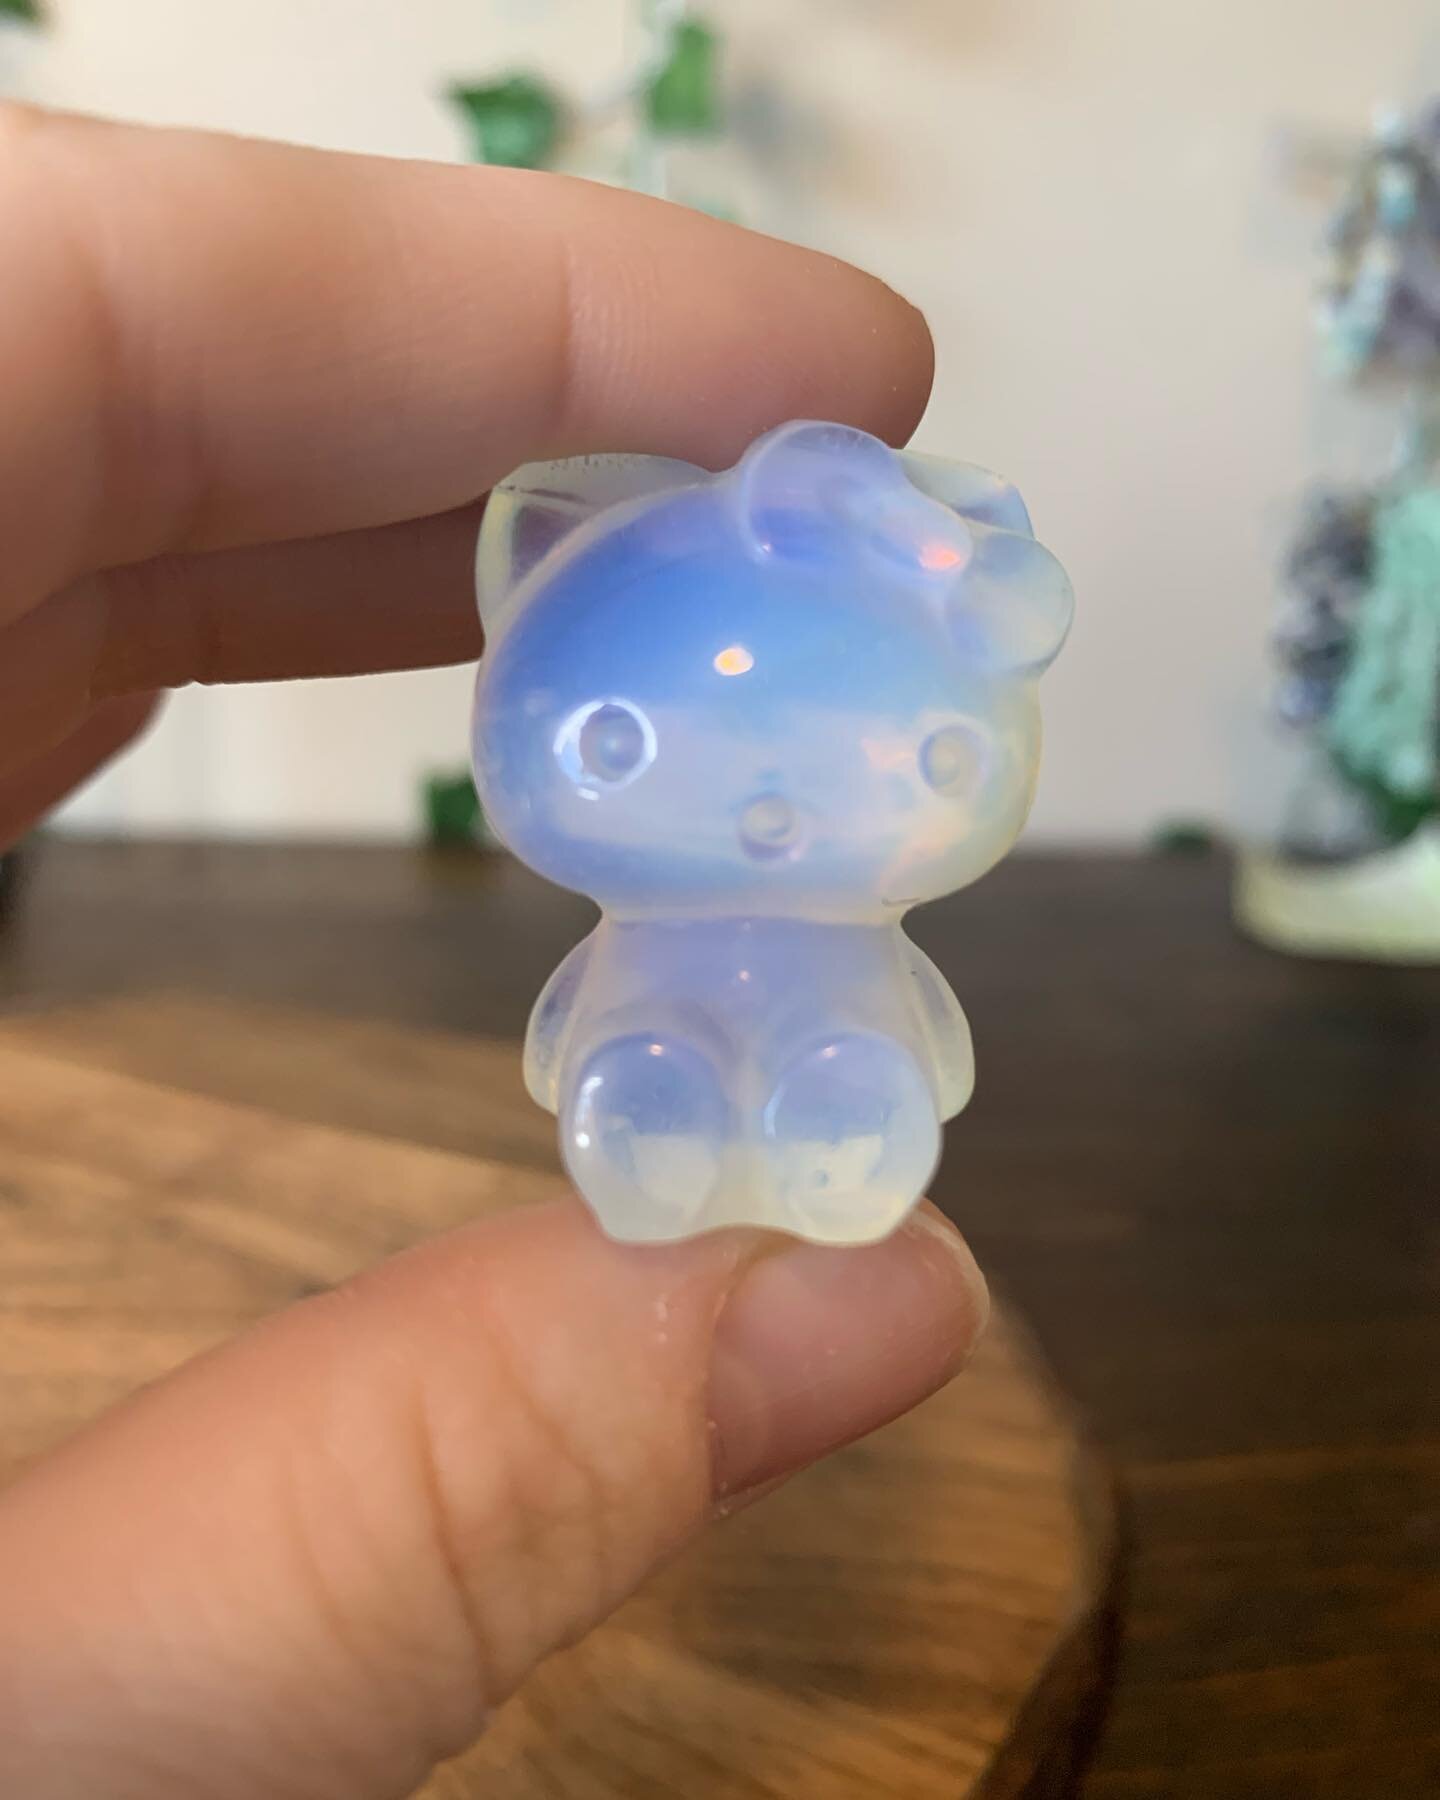 &bull;&bull;Opalite Hello Kitty&bull;&bull;

$15

Comment below to claim or send me a message!

Shop more like this! www.revivalcrystals.com

#hellokitty #hellokittylover #hellokittycarving #opalite #crystals #manmade #gemstones #collections #crystal